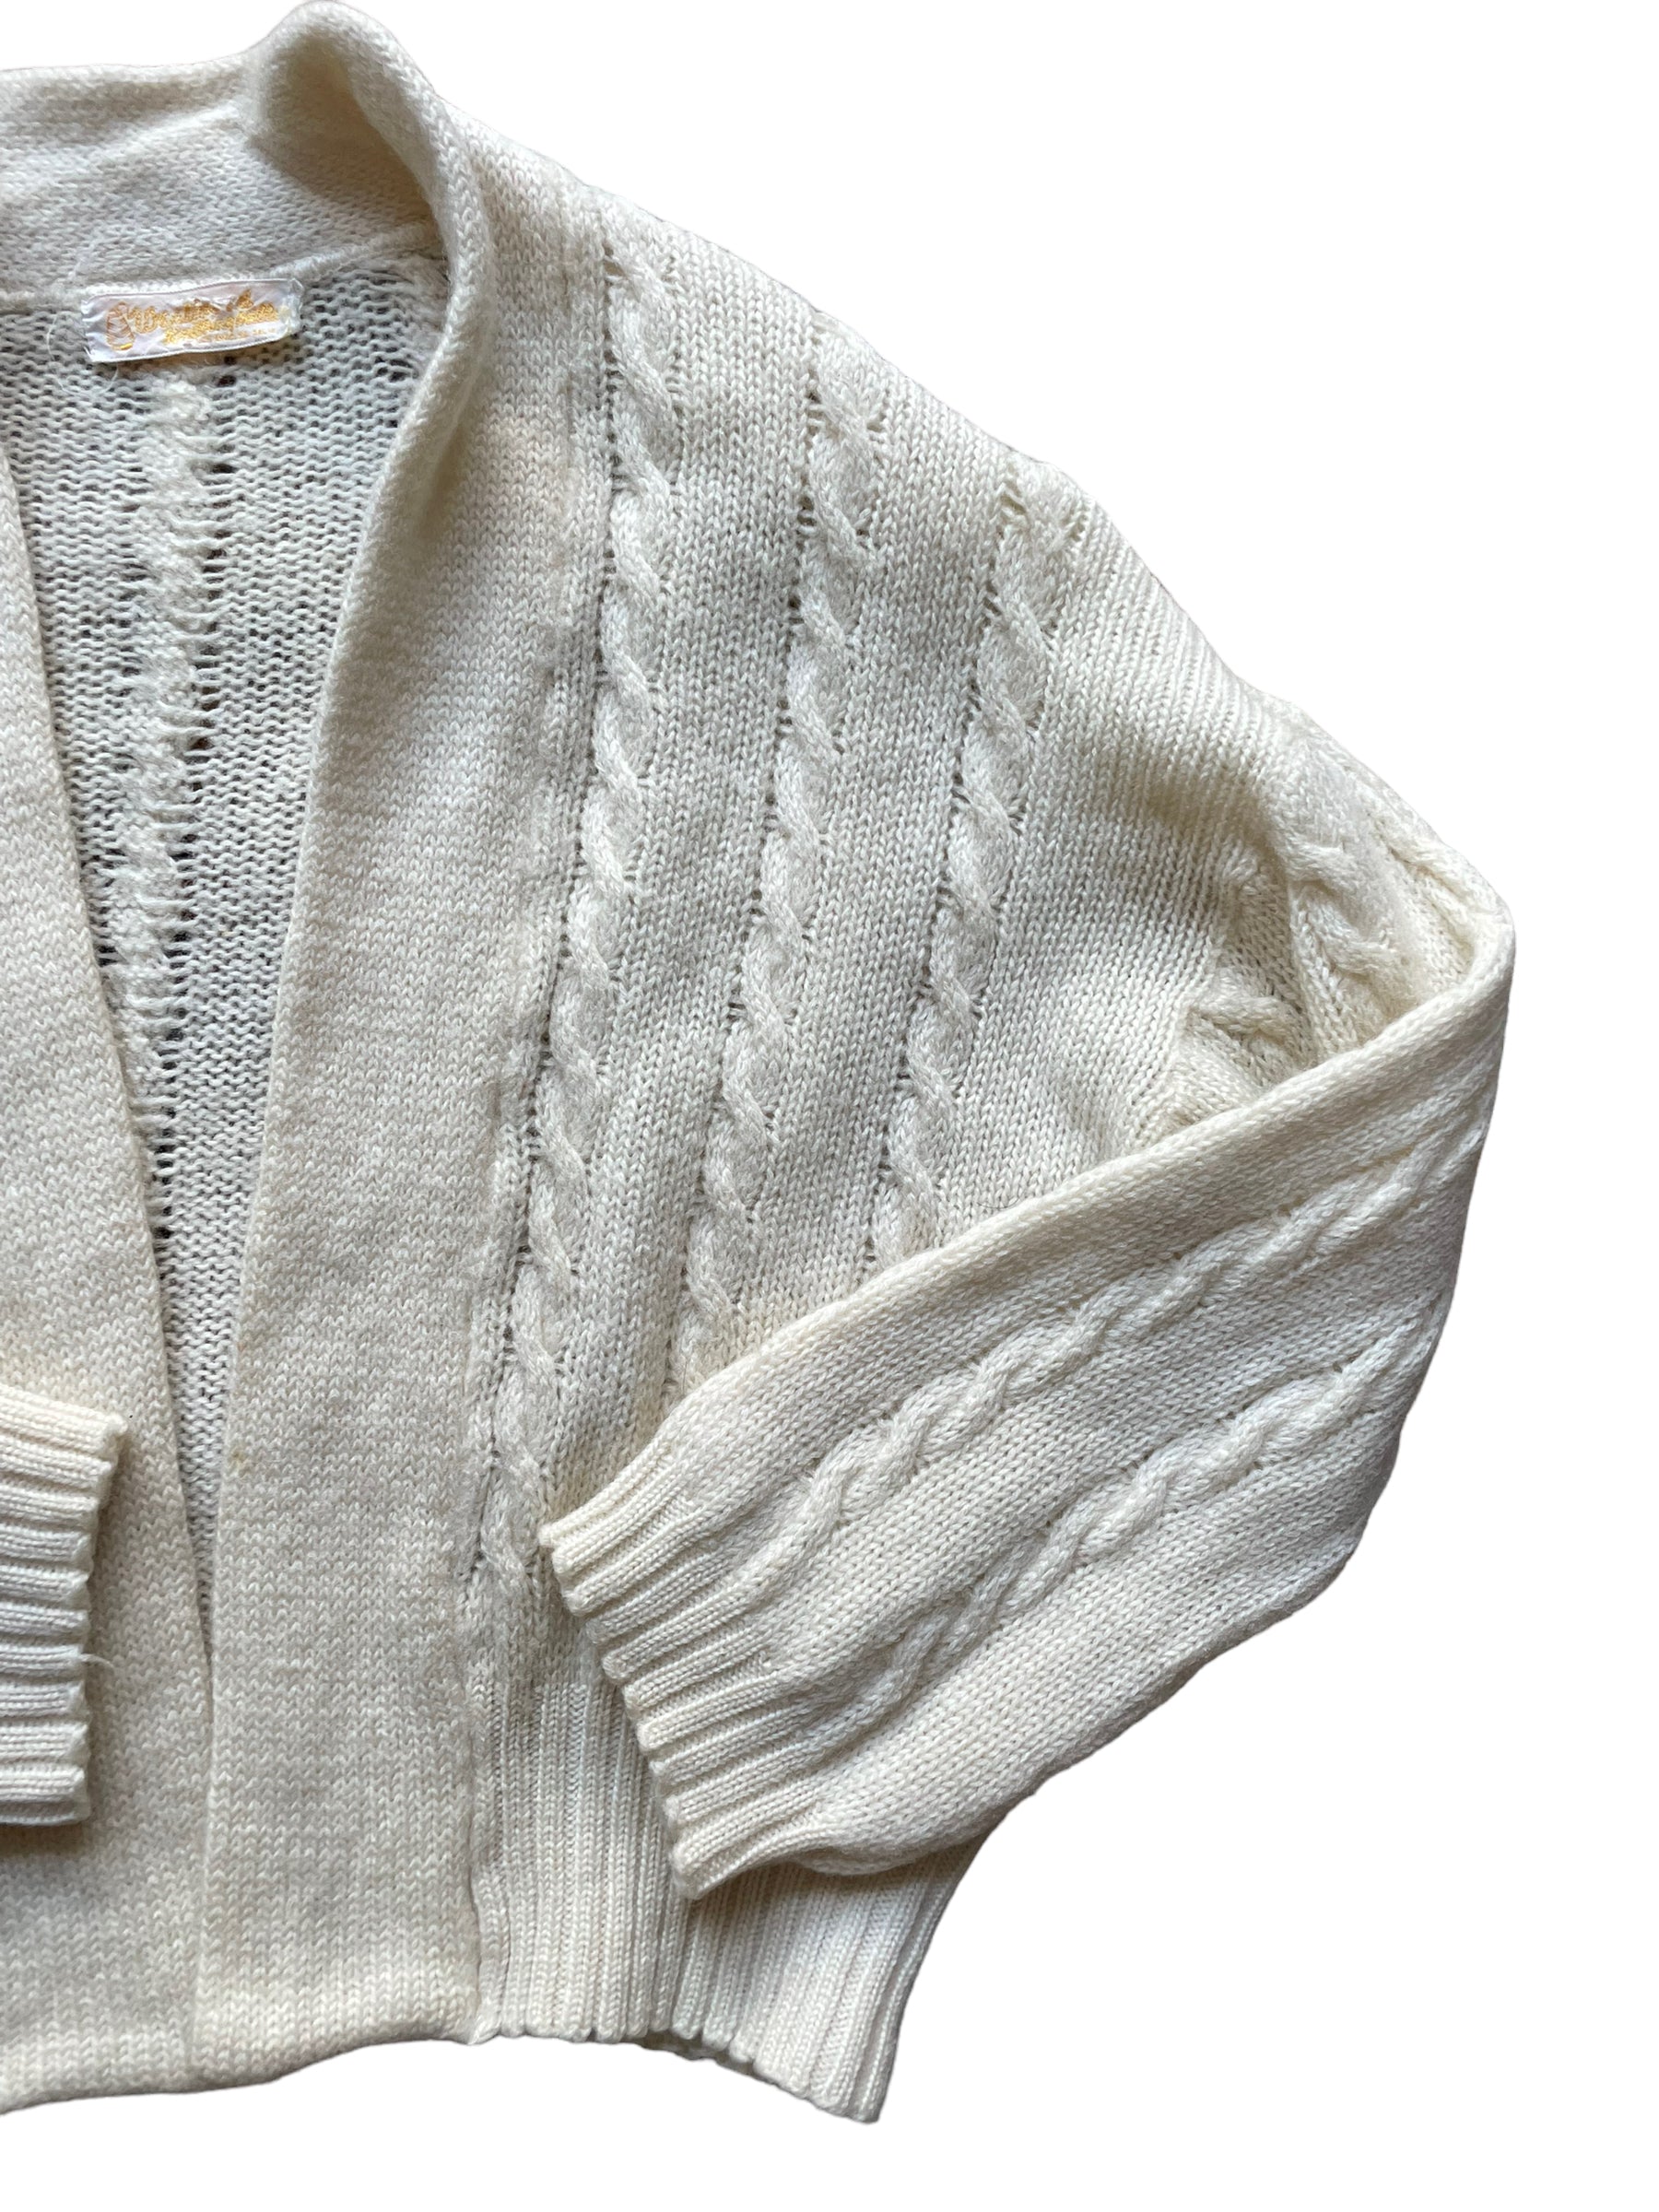 Vintage 1950s Cable Knit Cardigan Sweater | Barn Owl Seattle | Seattle True  Vintage